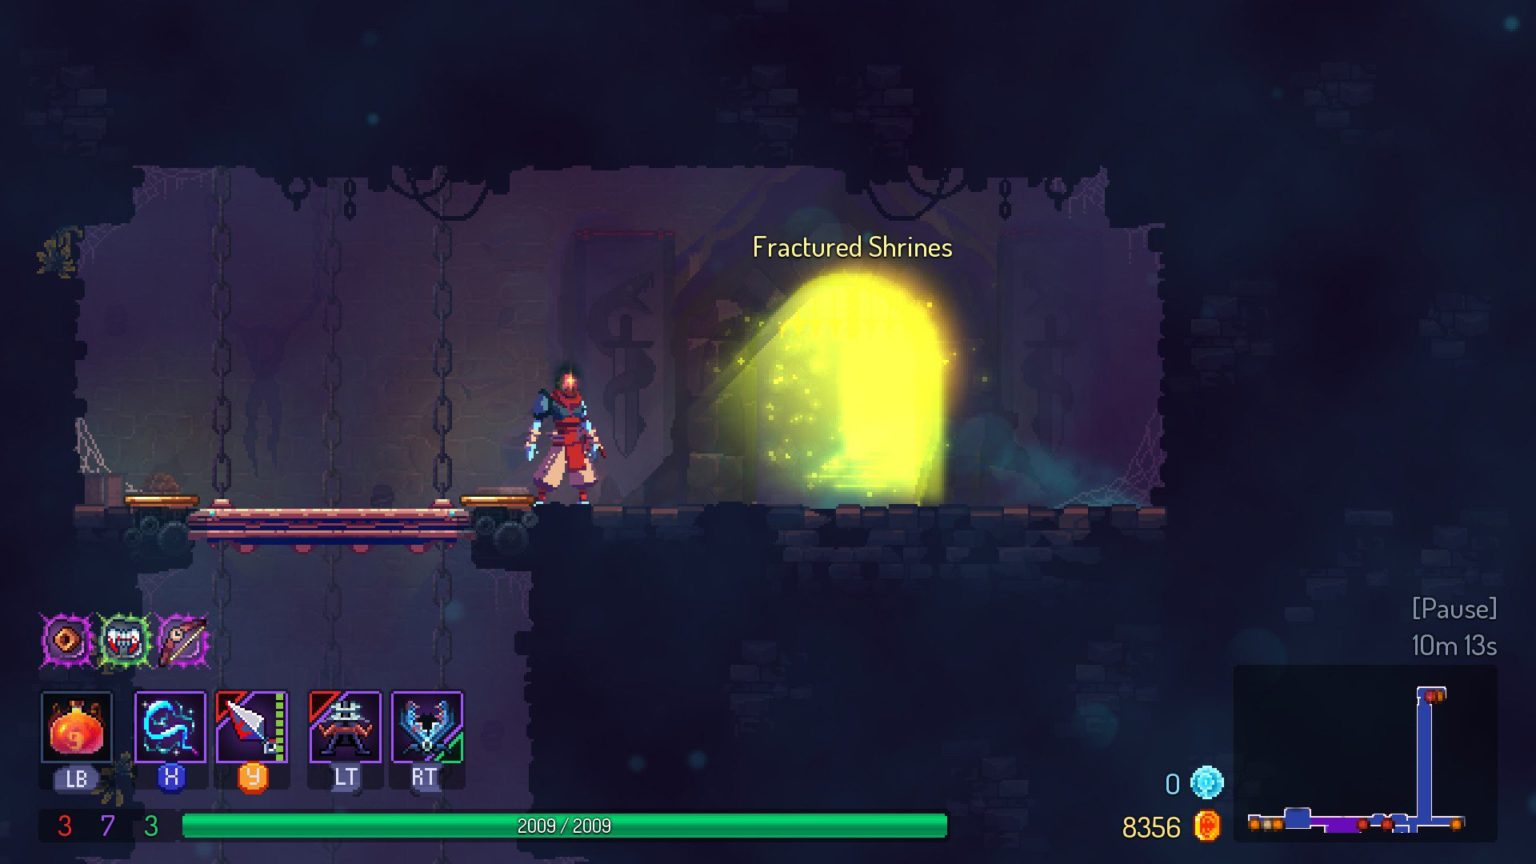 Here’s how to find the Fatal Falls levels in Dead Cells